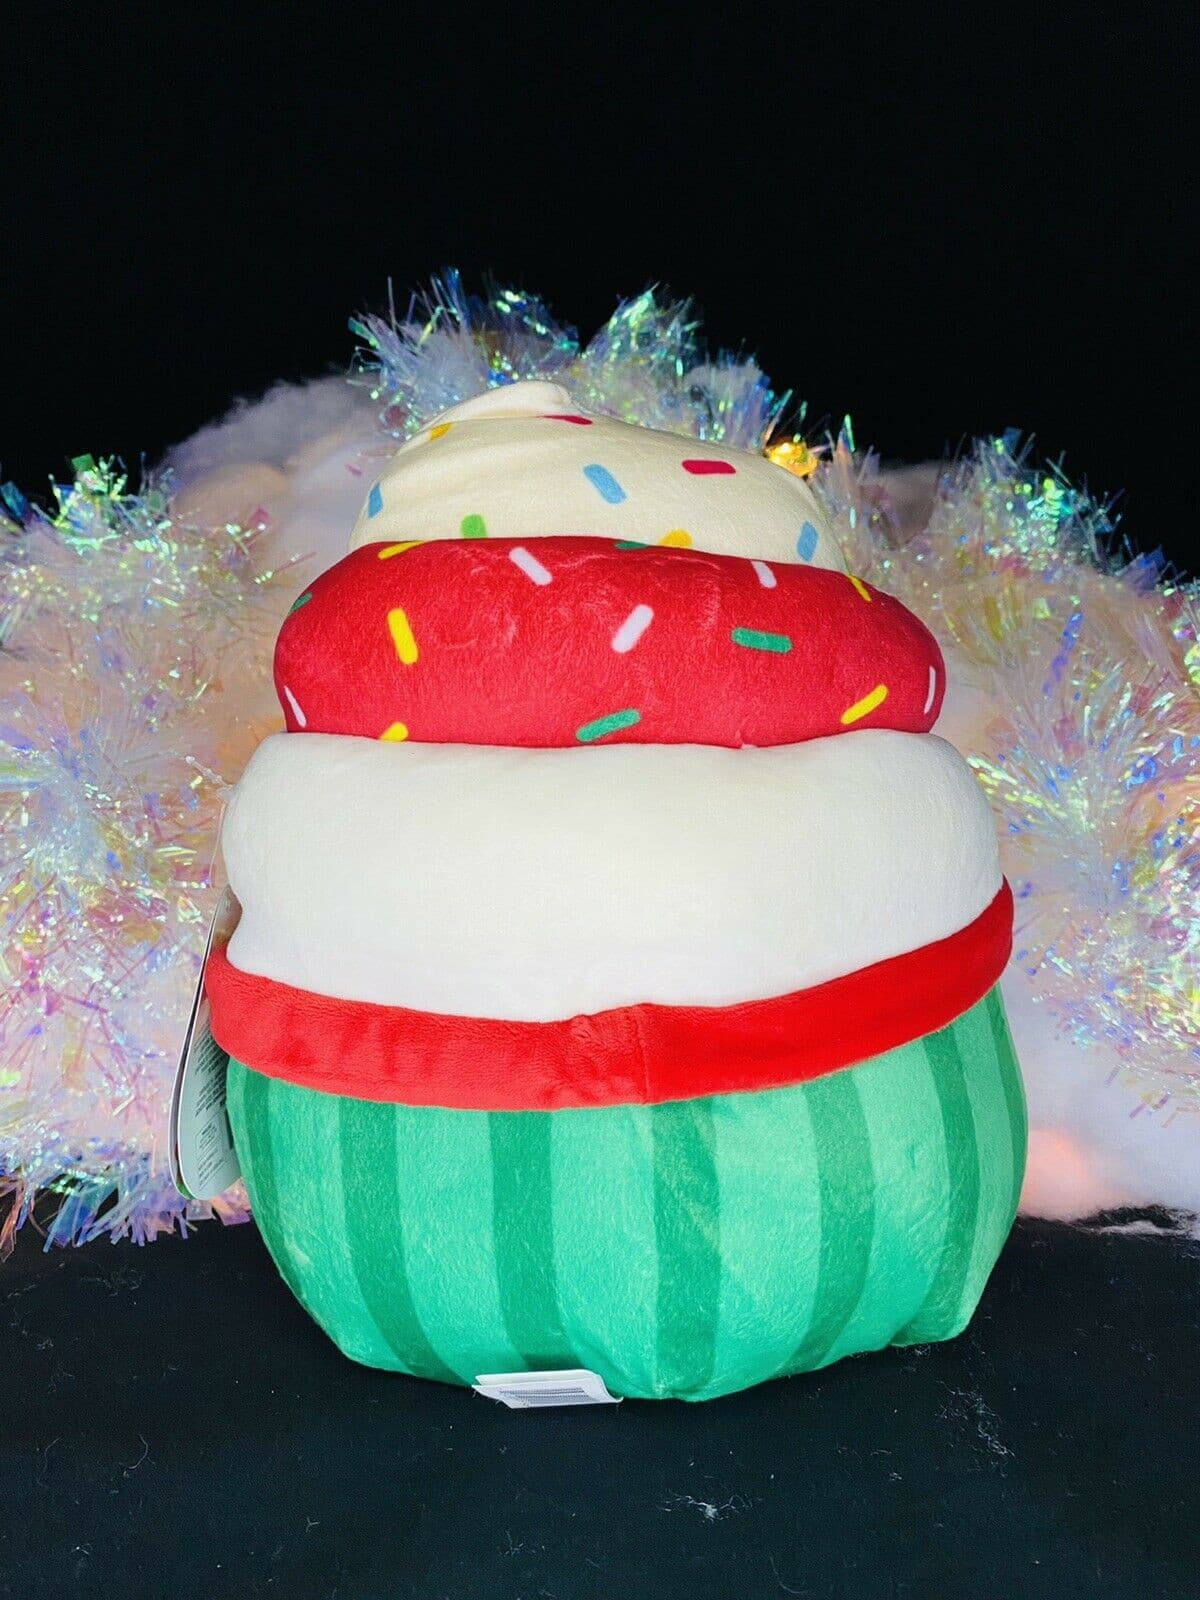 Squishmallow 8" Christmas SET Dulce the Peppermint, Chandra & Chantal the Cupcakes | Sweet Magnolia Charms.